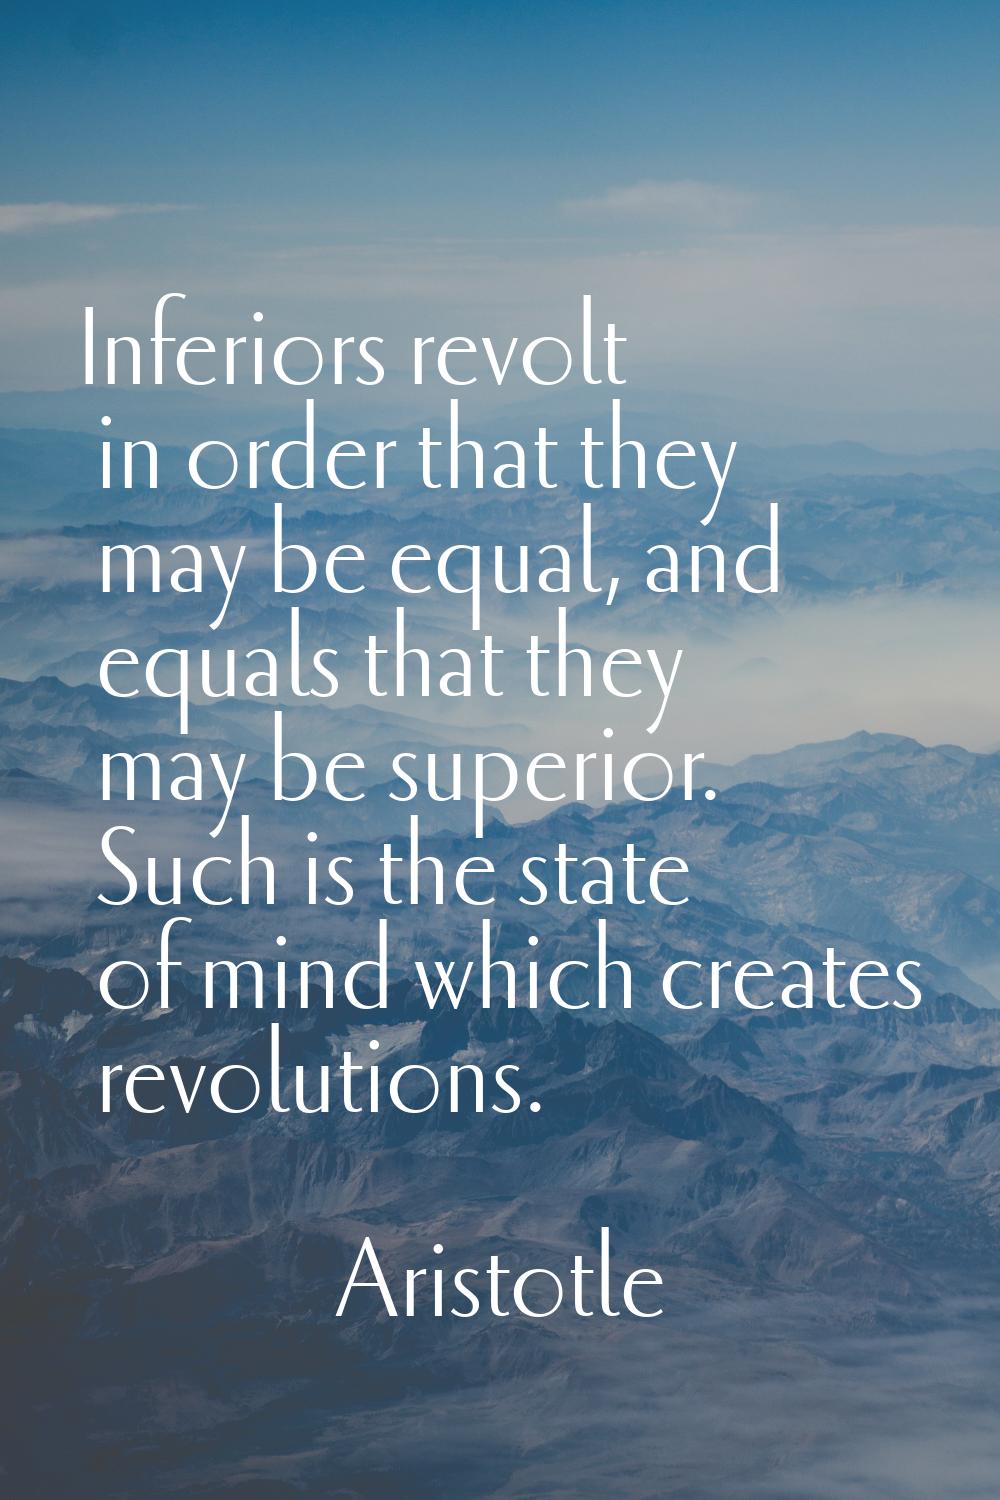 Inferiors revolt in order that they may be equal, and equals that they may be superior. Such is the